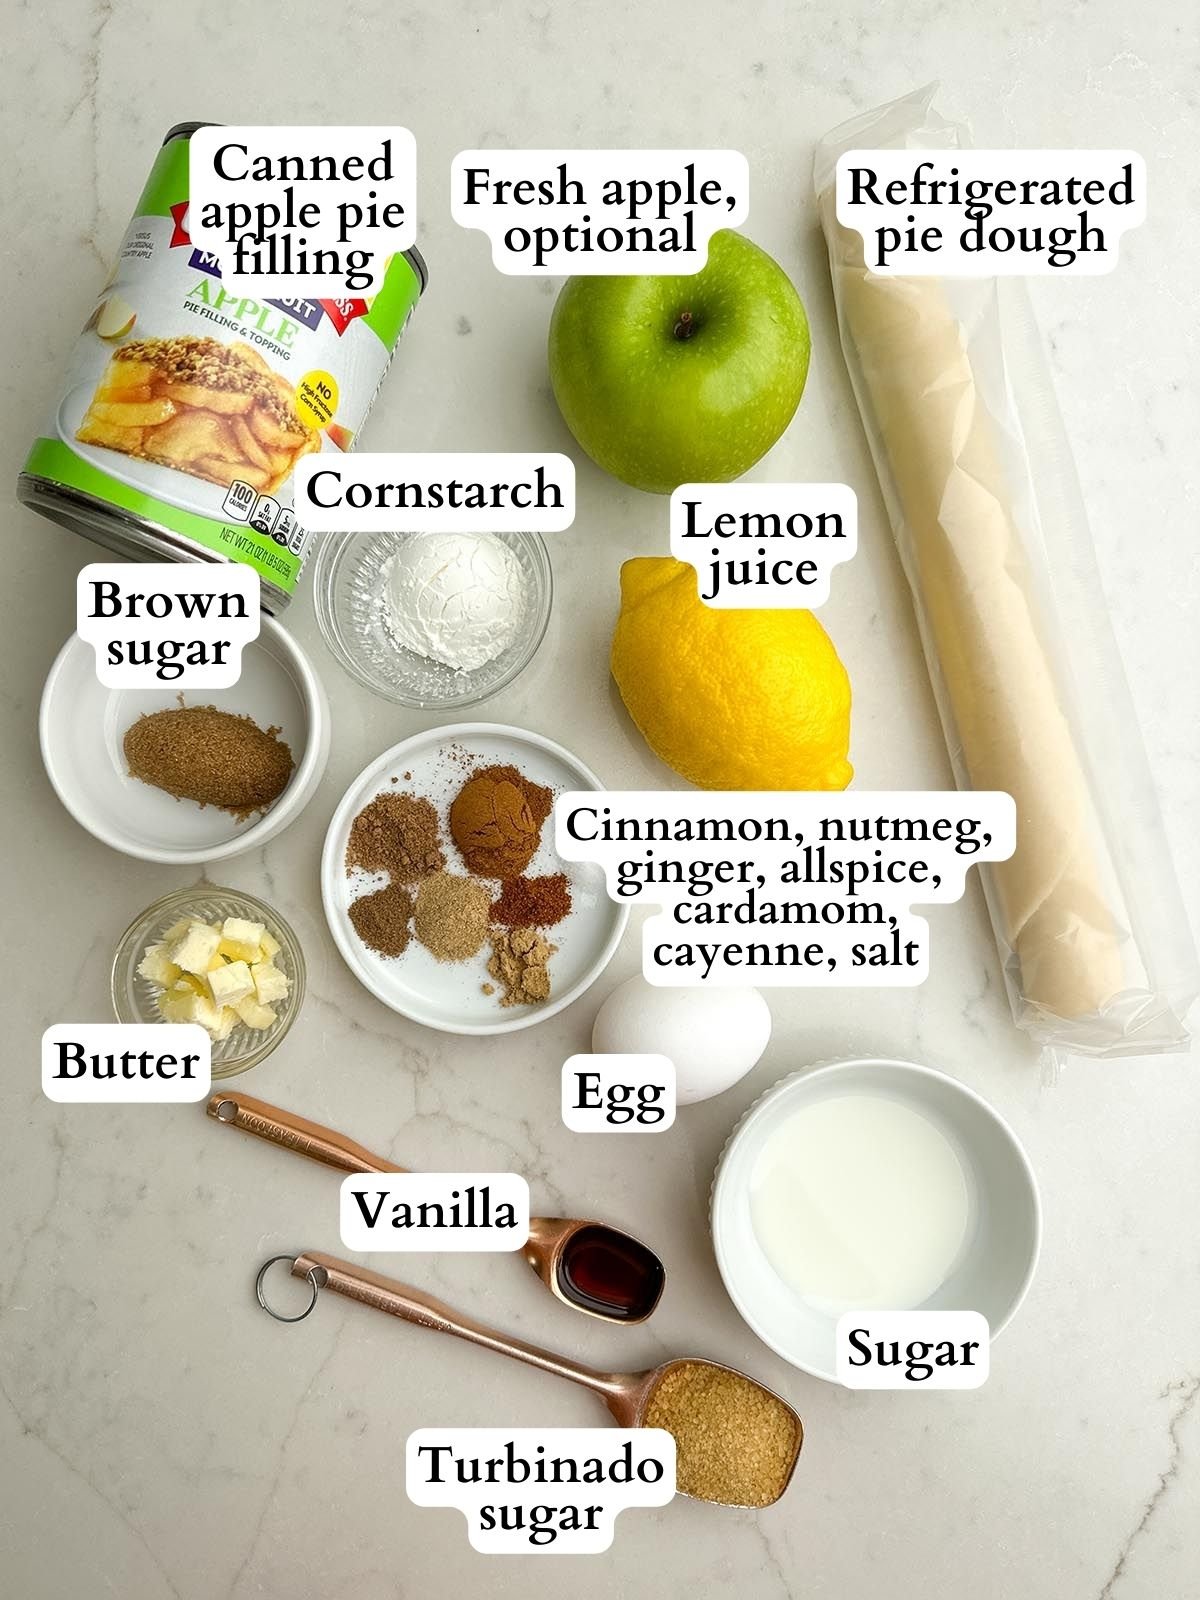 ingredients to make canned apple pie